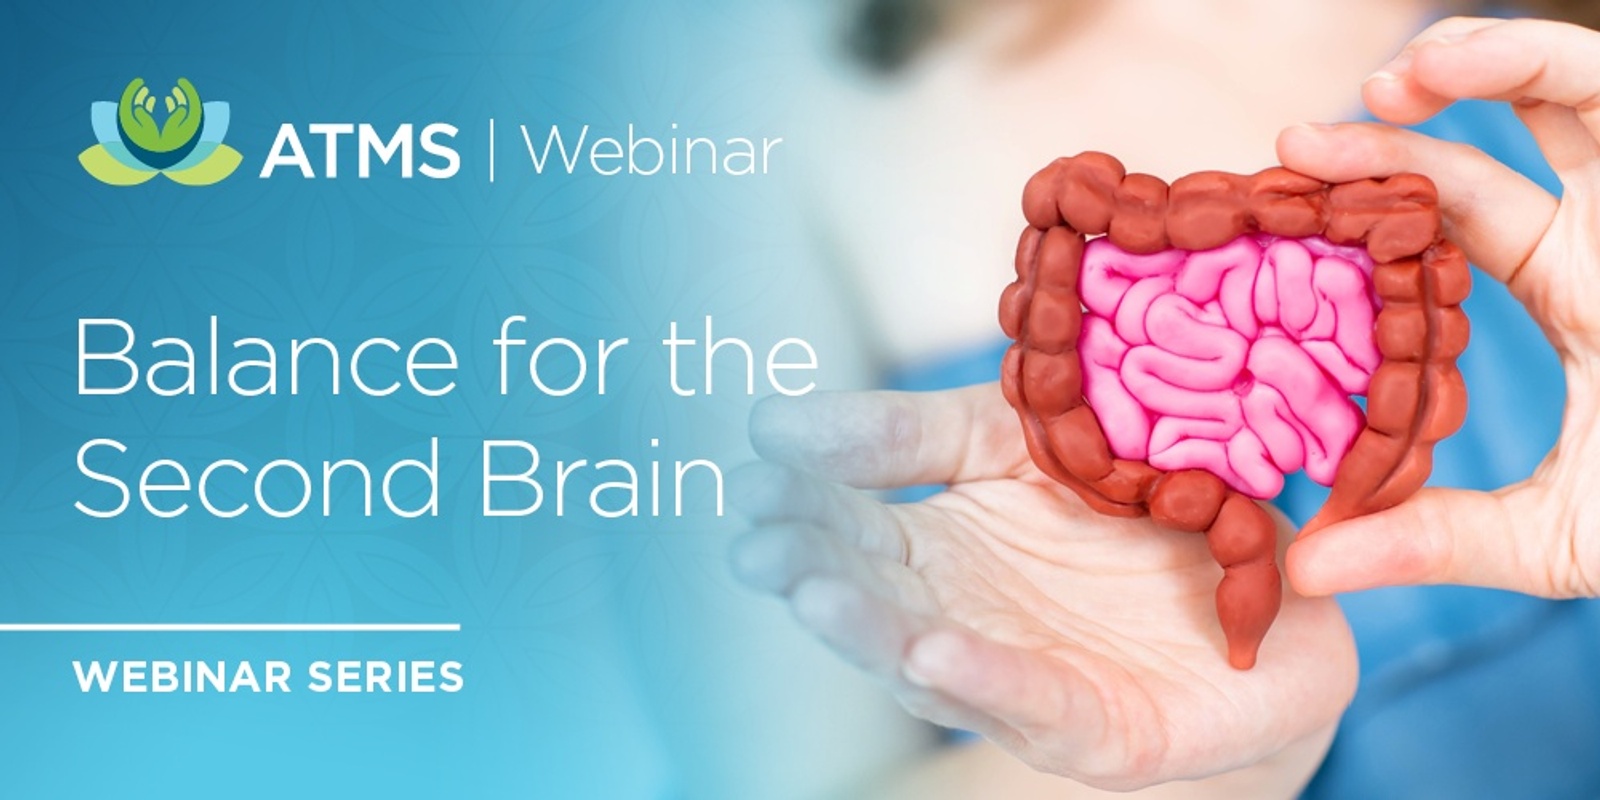 Recordings of the Webinar Series: Balance for the Second Brain